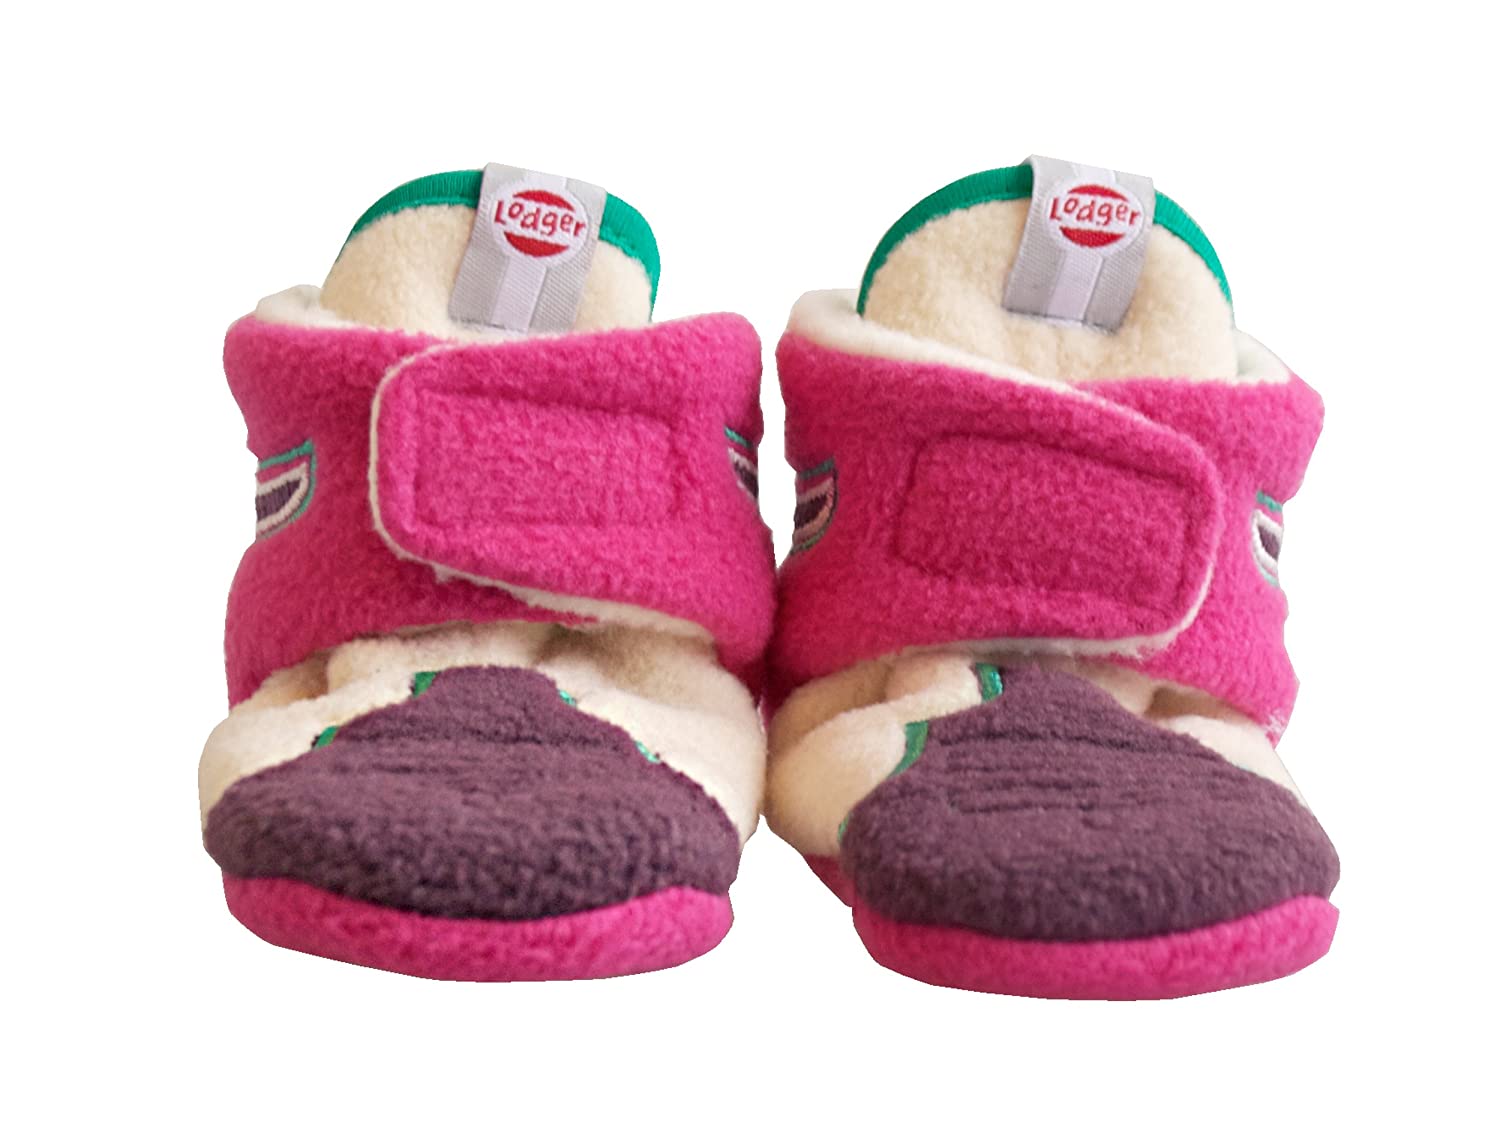 Lodger SLFF573 12- 18 M Baby Shoes Slipper Native With Anti-Slip Pink